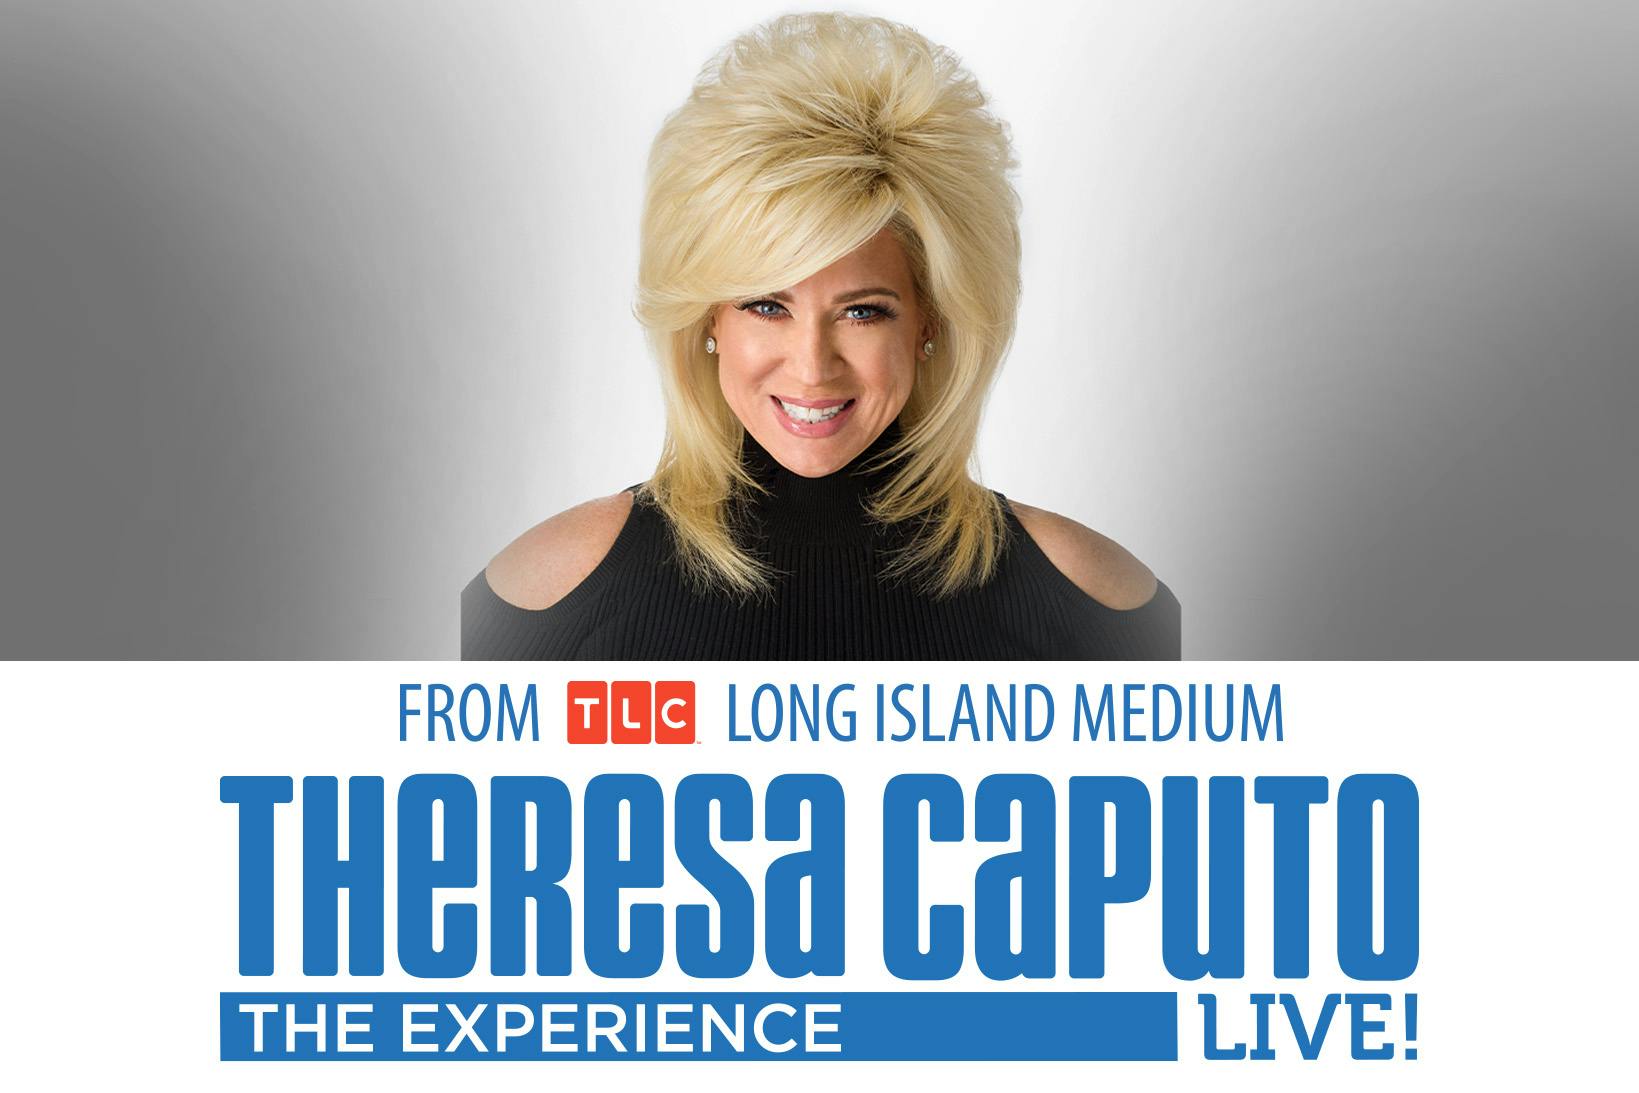 THERESA CAPUTO LIVE! "THE EXPERIENCE" 
 COMES TO THE EVENT CENTER AT RIVERS CASINO PITTSBURGH 